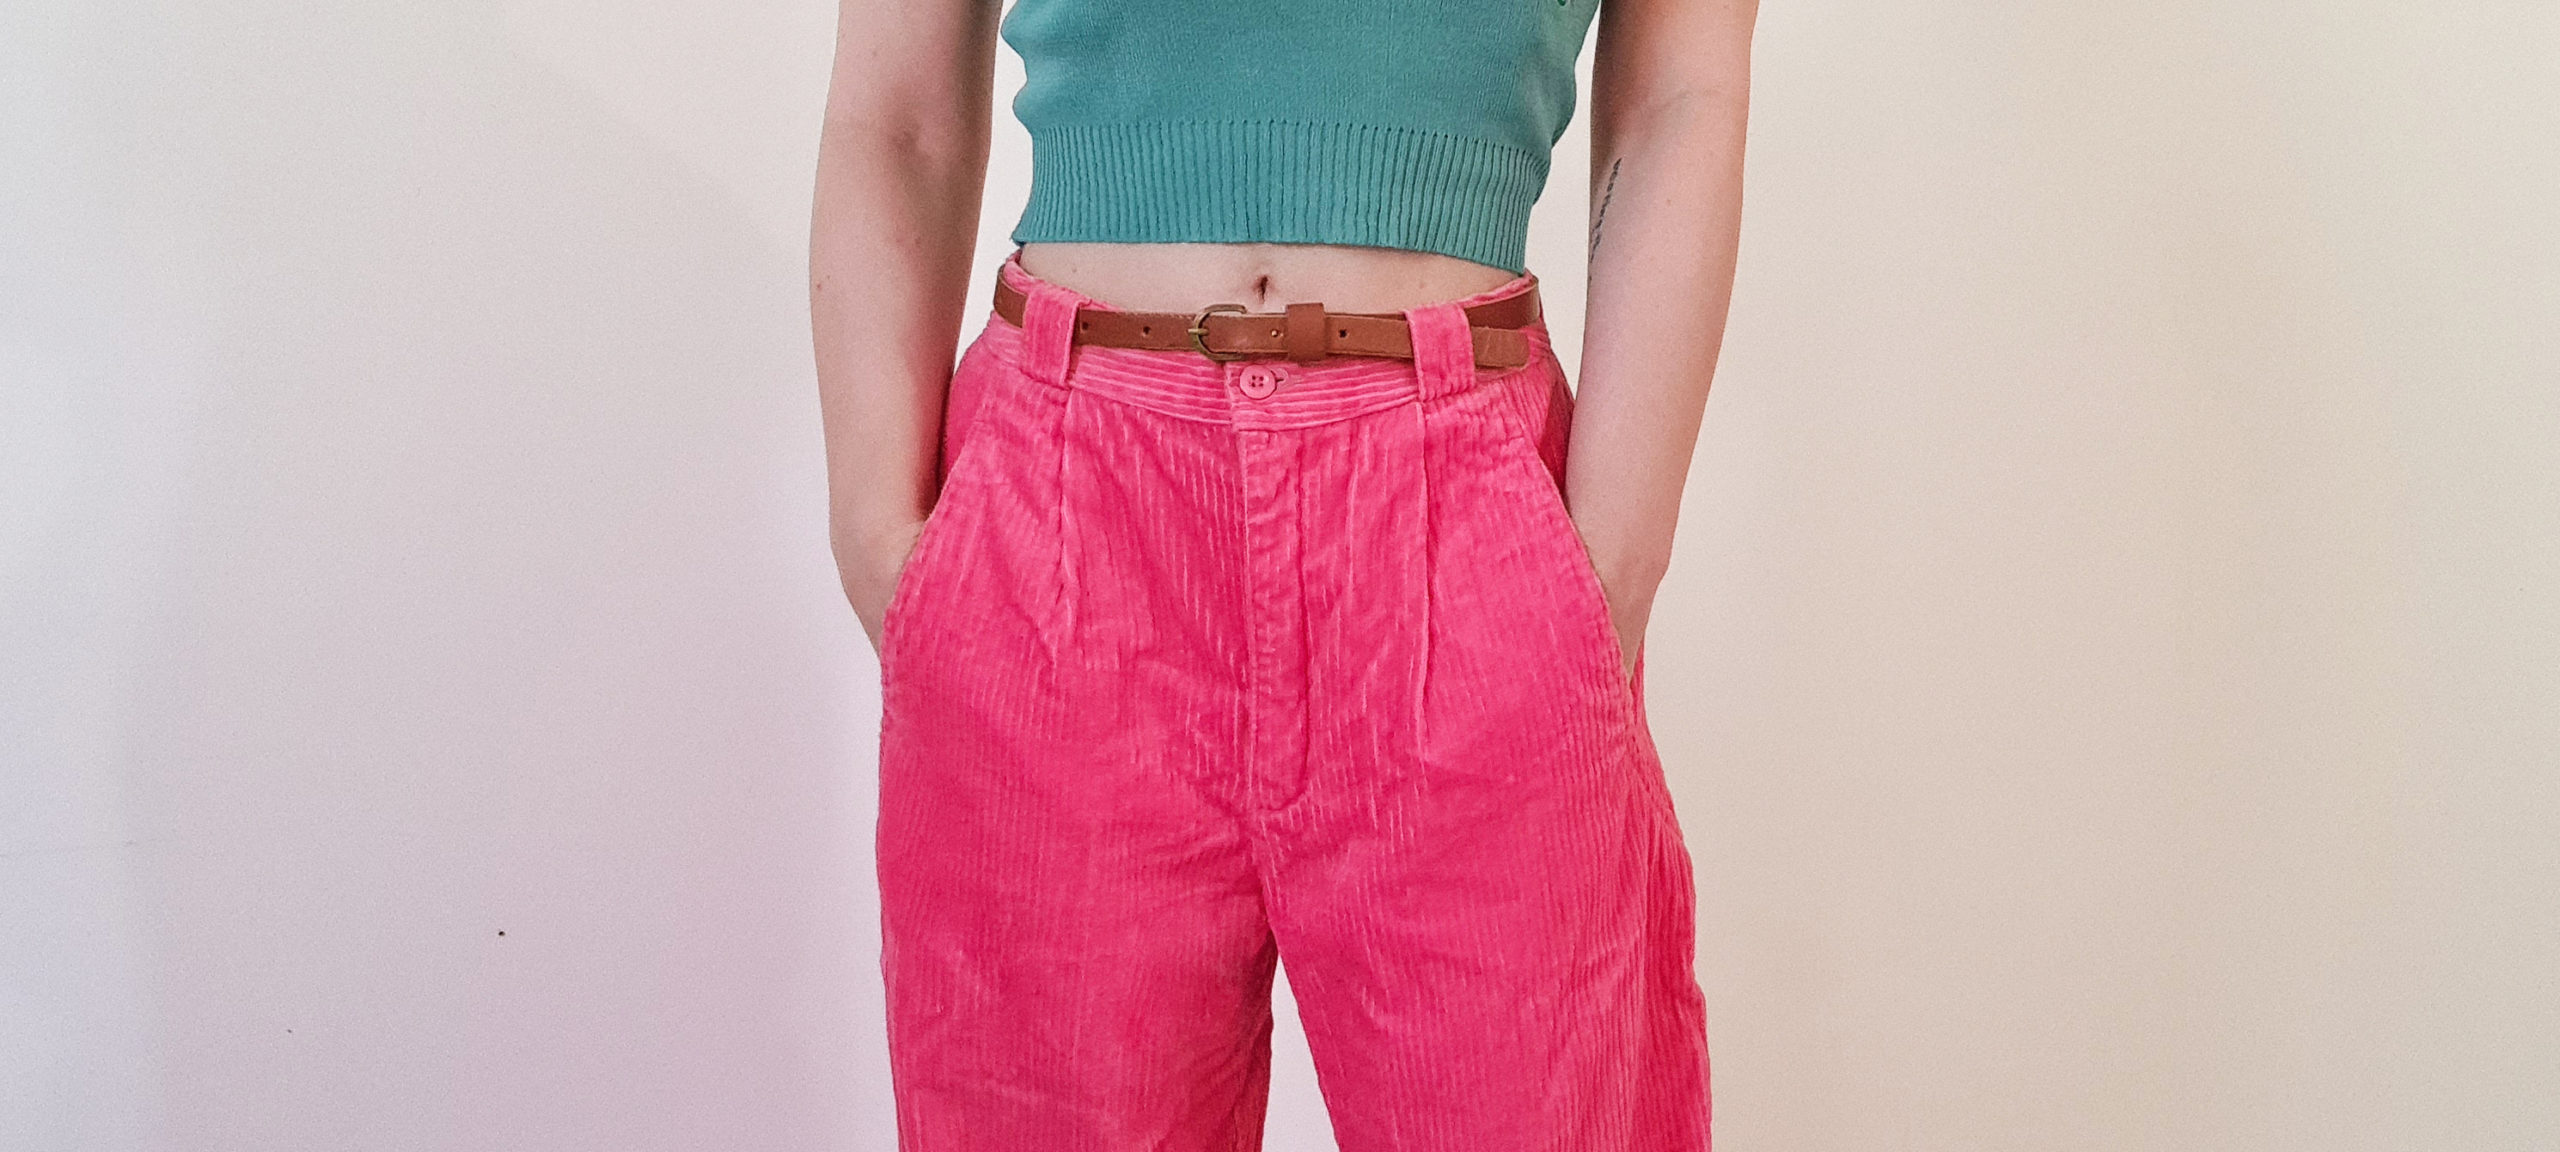 hot pink corduroy trousers being worn with a brown leather belt